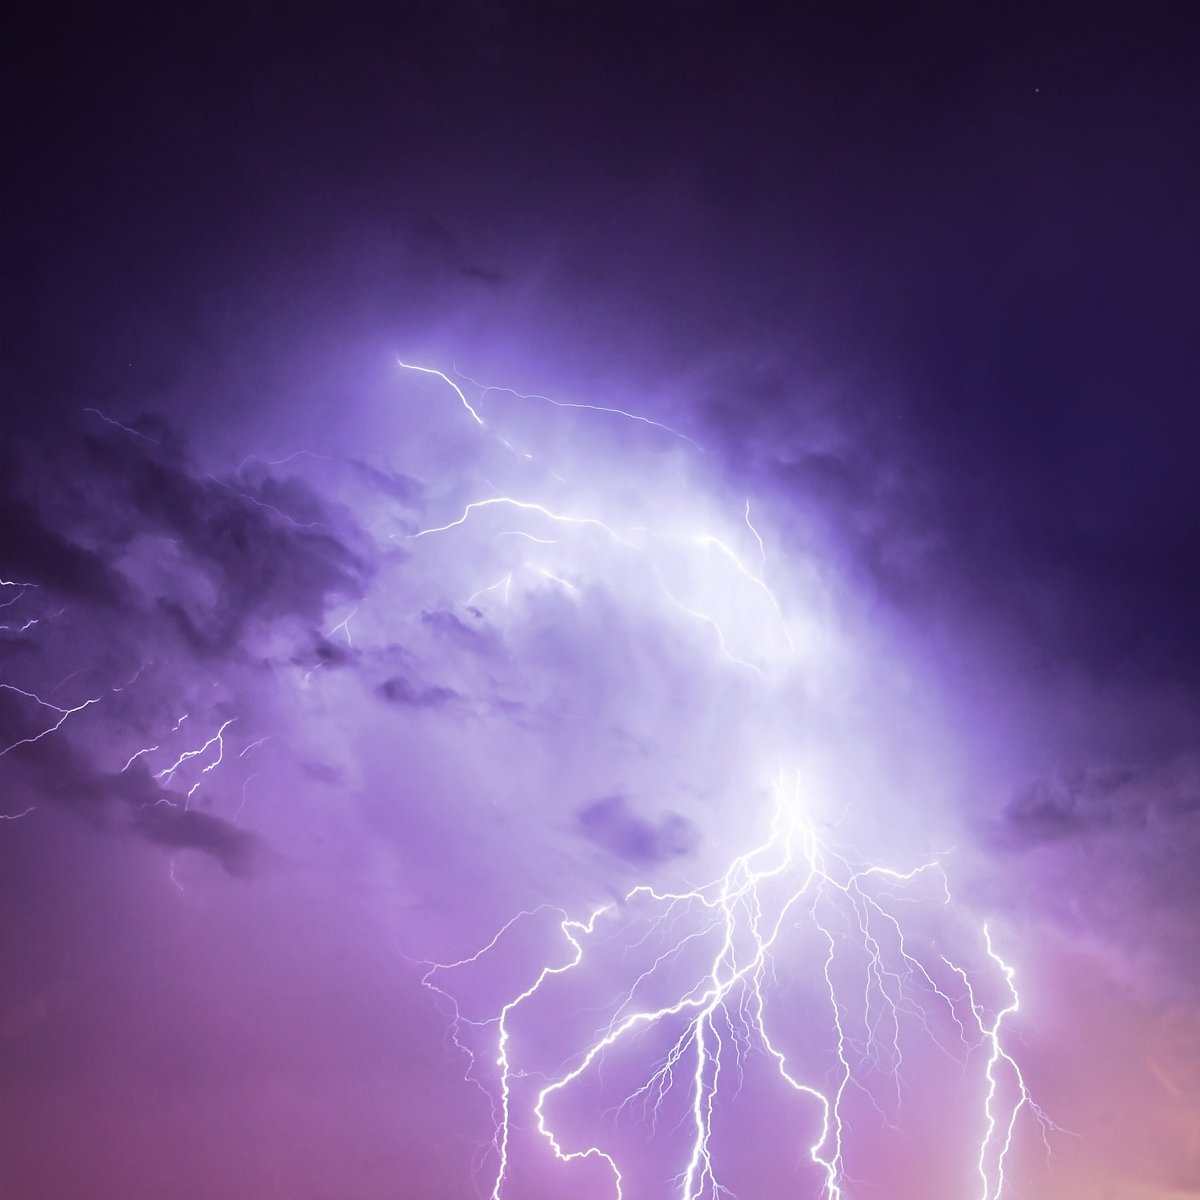 Night sky scene pictures with lightning and thunder